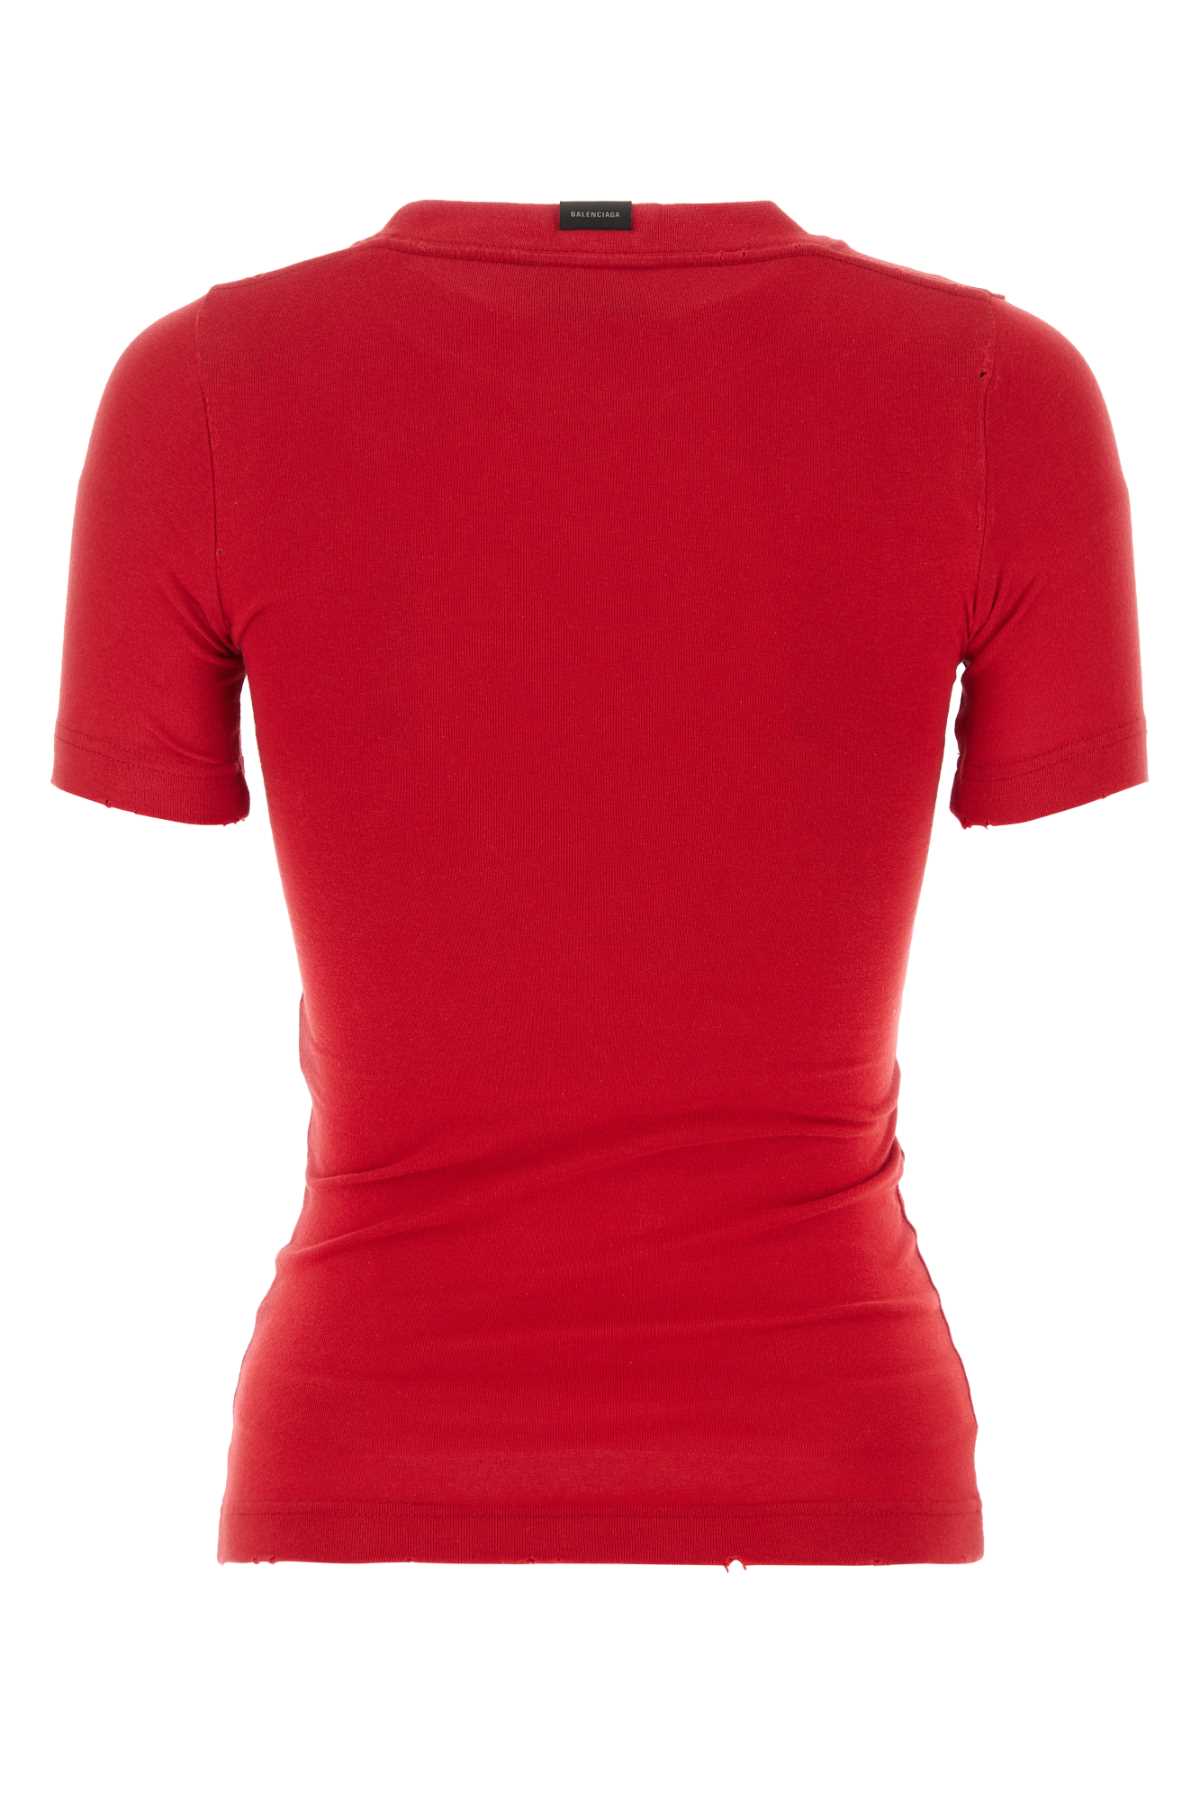 Balenciaga Red Cotton T-shirt In Fadedred